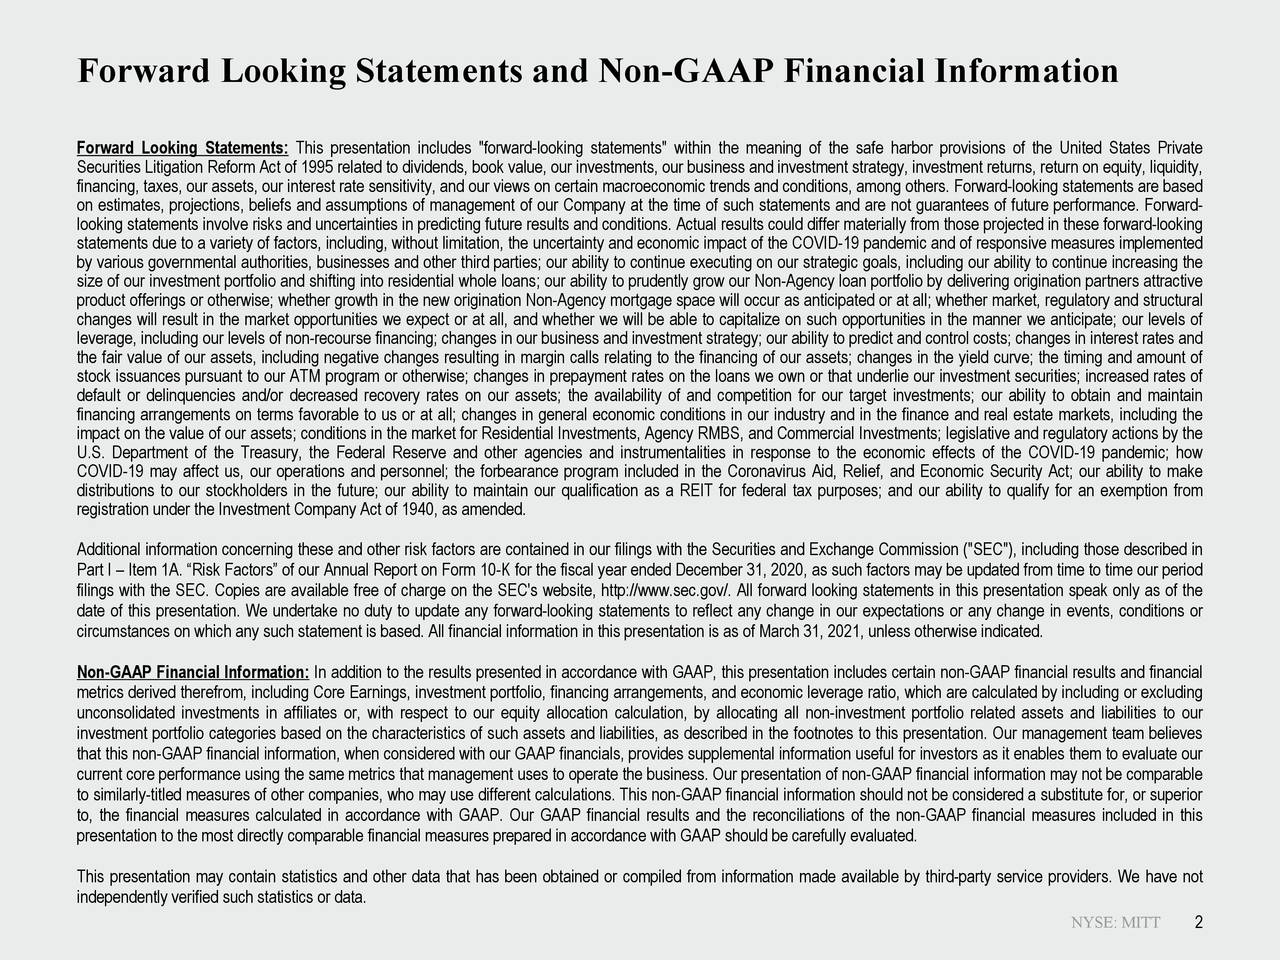 Forward Looking Statements and Non-GAAP Financial Information